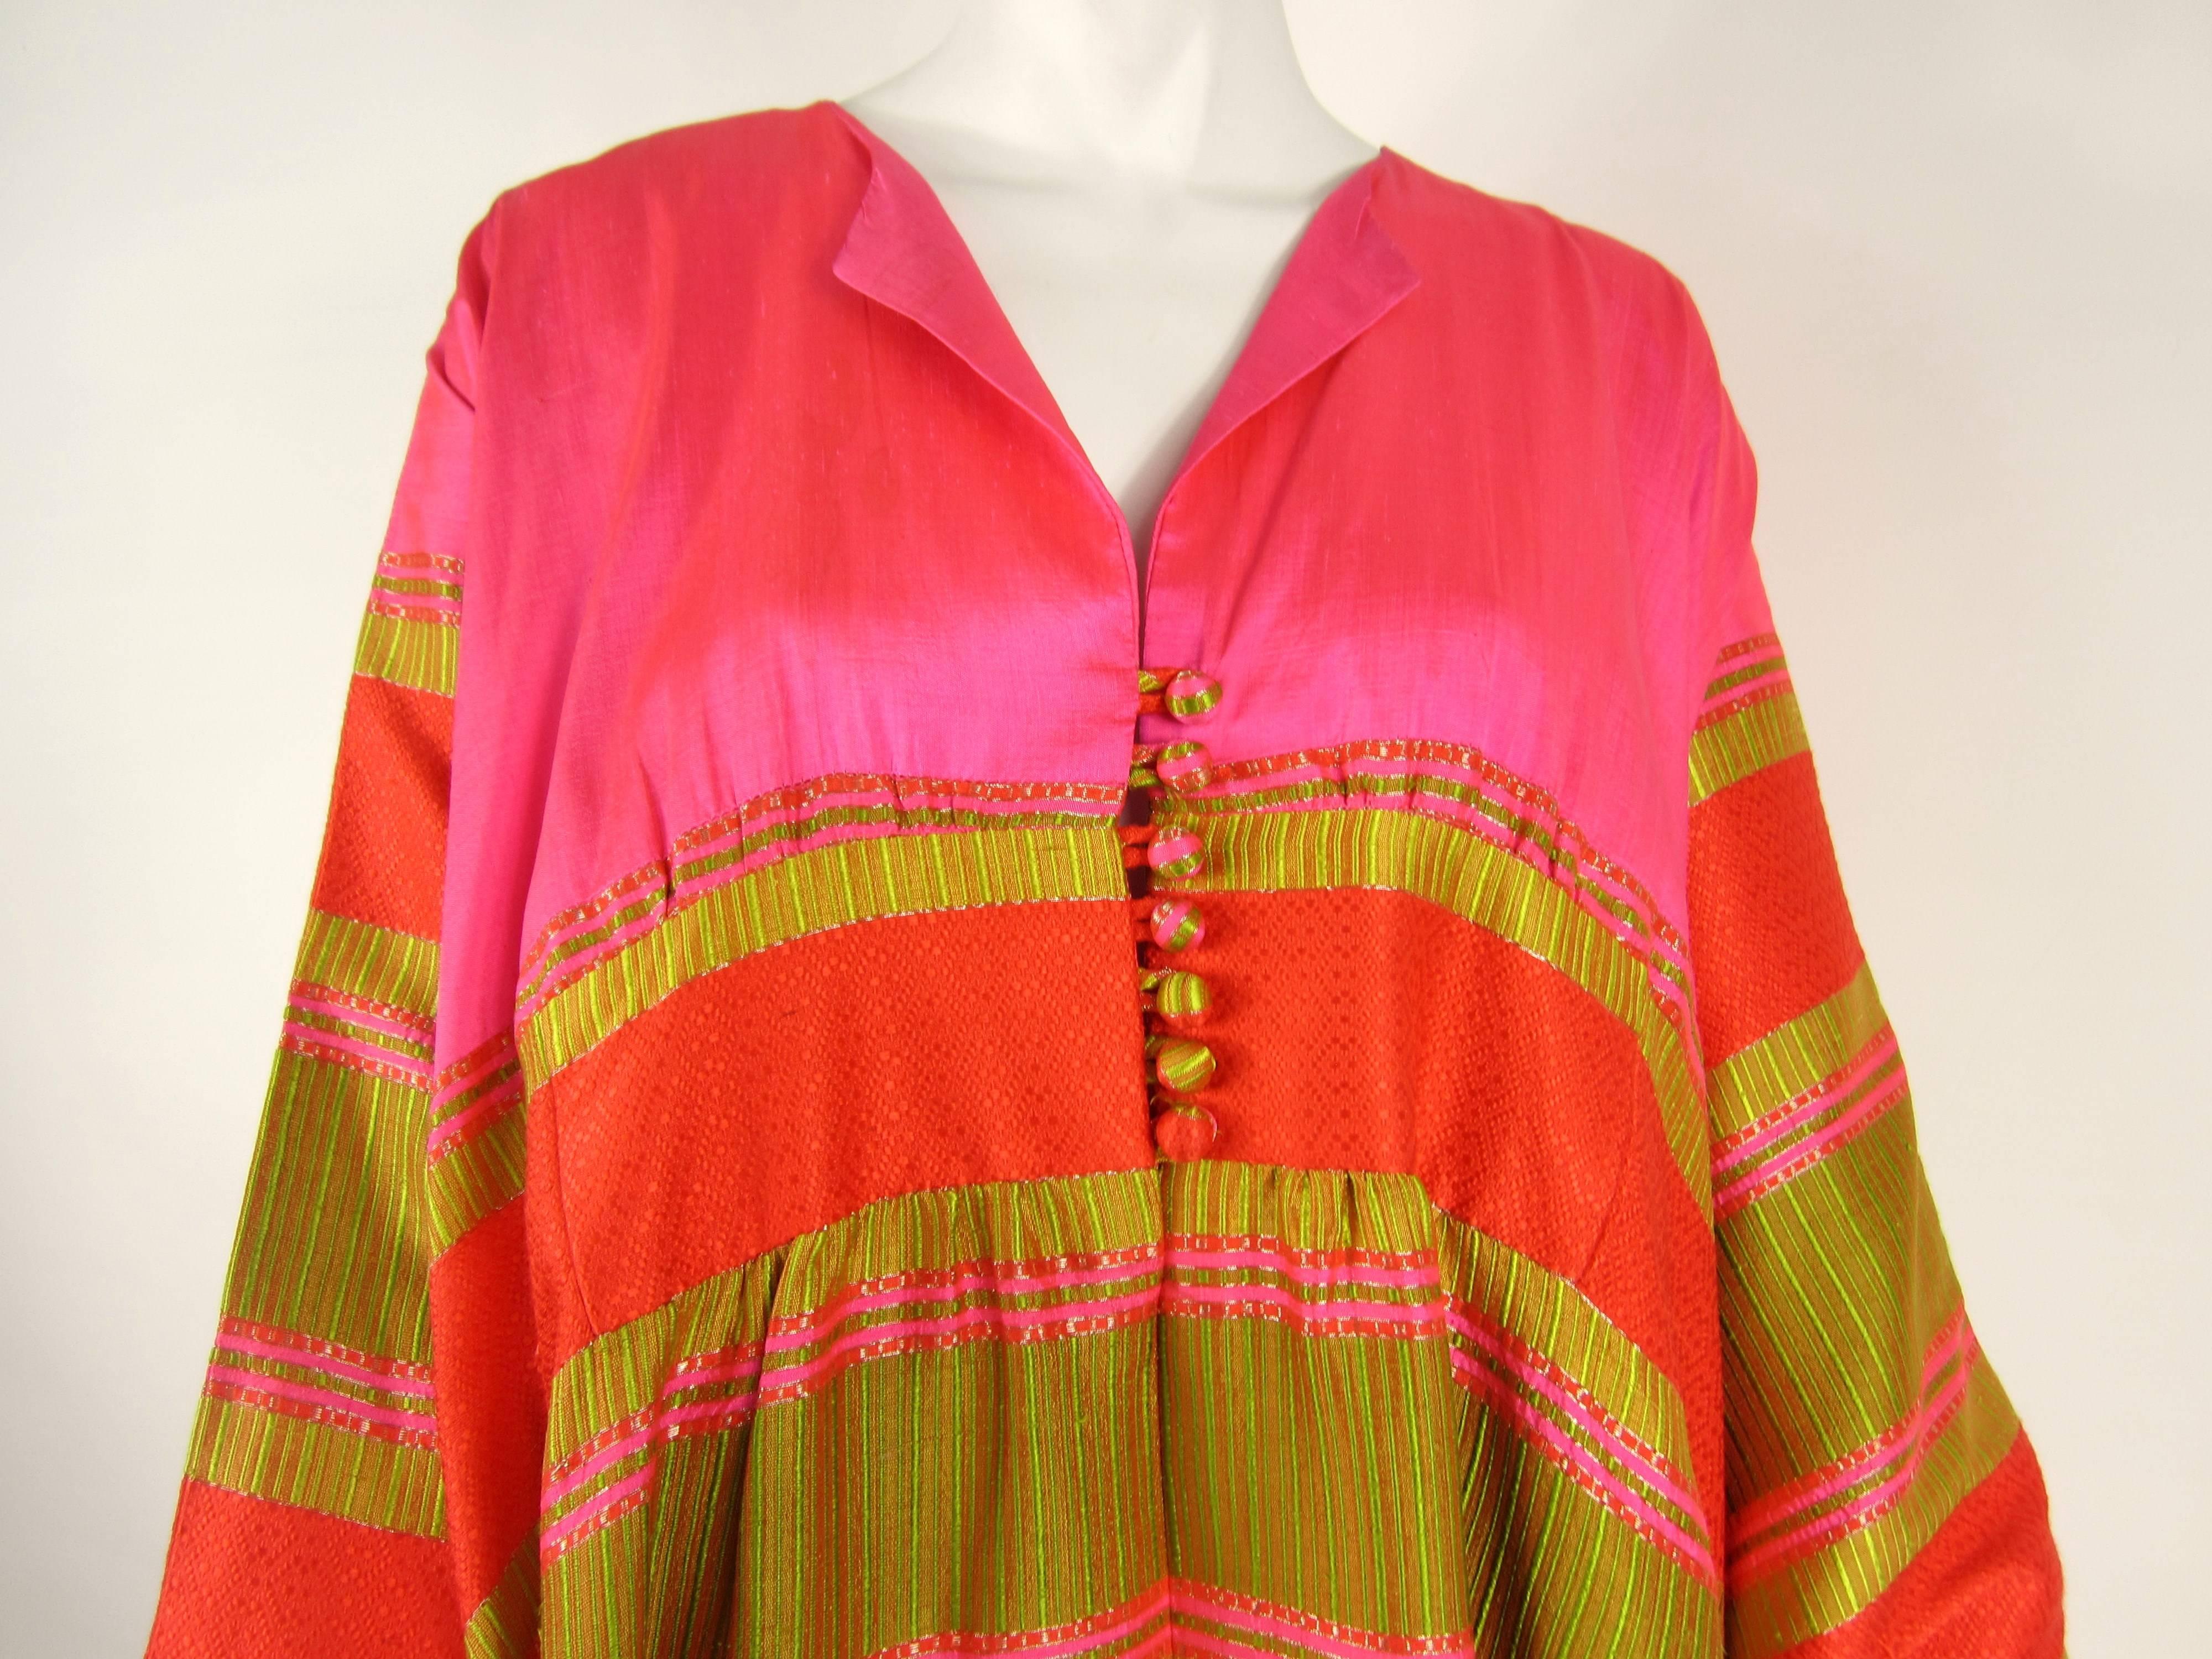 Stunning Silk Dupioni Caftan. LOOK AT THESE COLORS!!! One size fits all. Purchased at Bergdorf Goodman. The colors are this are amazing! It is 58 inches of Lux Silk. We have been selling this collection on 1st dibs since 2013. You can Follow us via